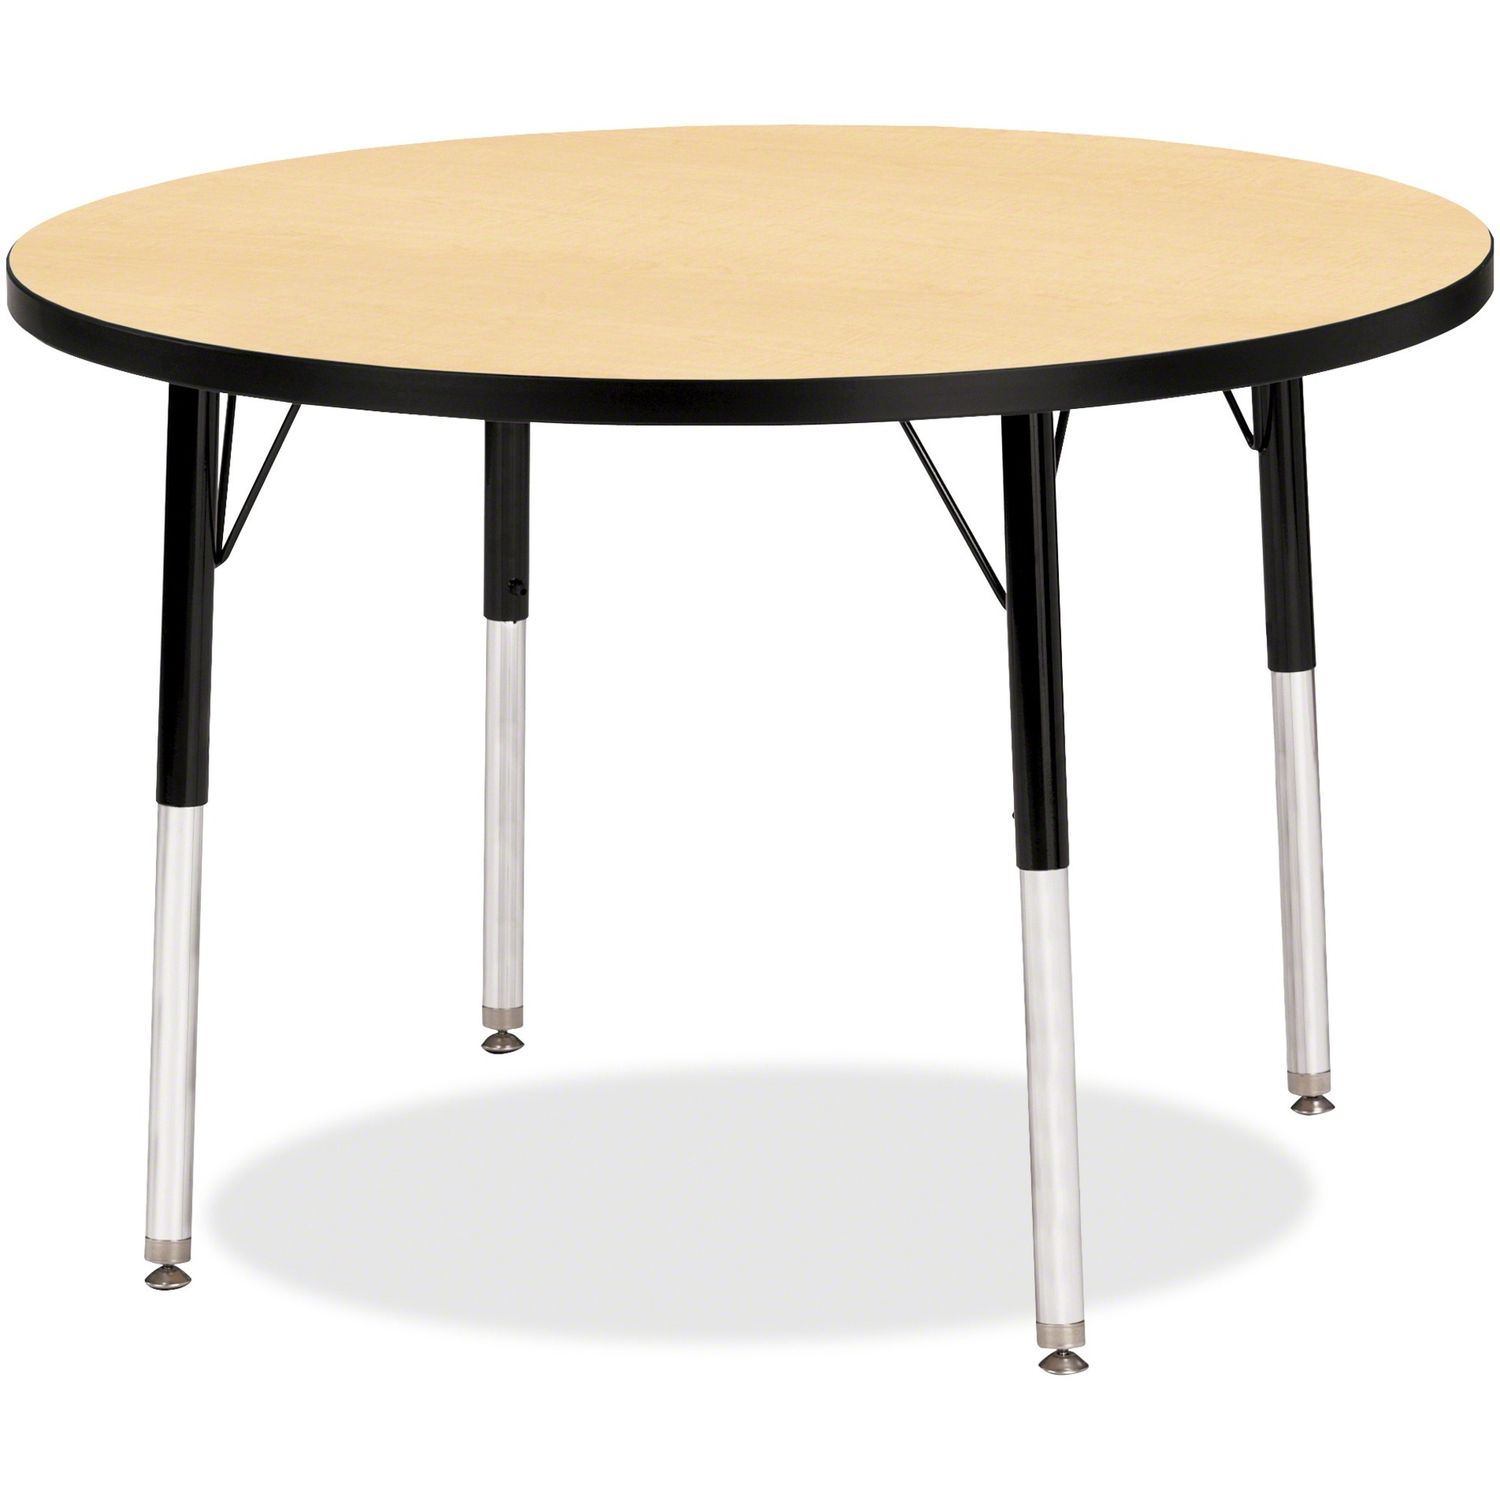 Berries Adult Height Color Top Round Table Laminated Round, Maple Top, Four Leg Base, 4 Legs, 1.13" Table Top Thickness x 36" Table Top Diameter, 31" Height, Assembly Required, Powder Coated, Steel